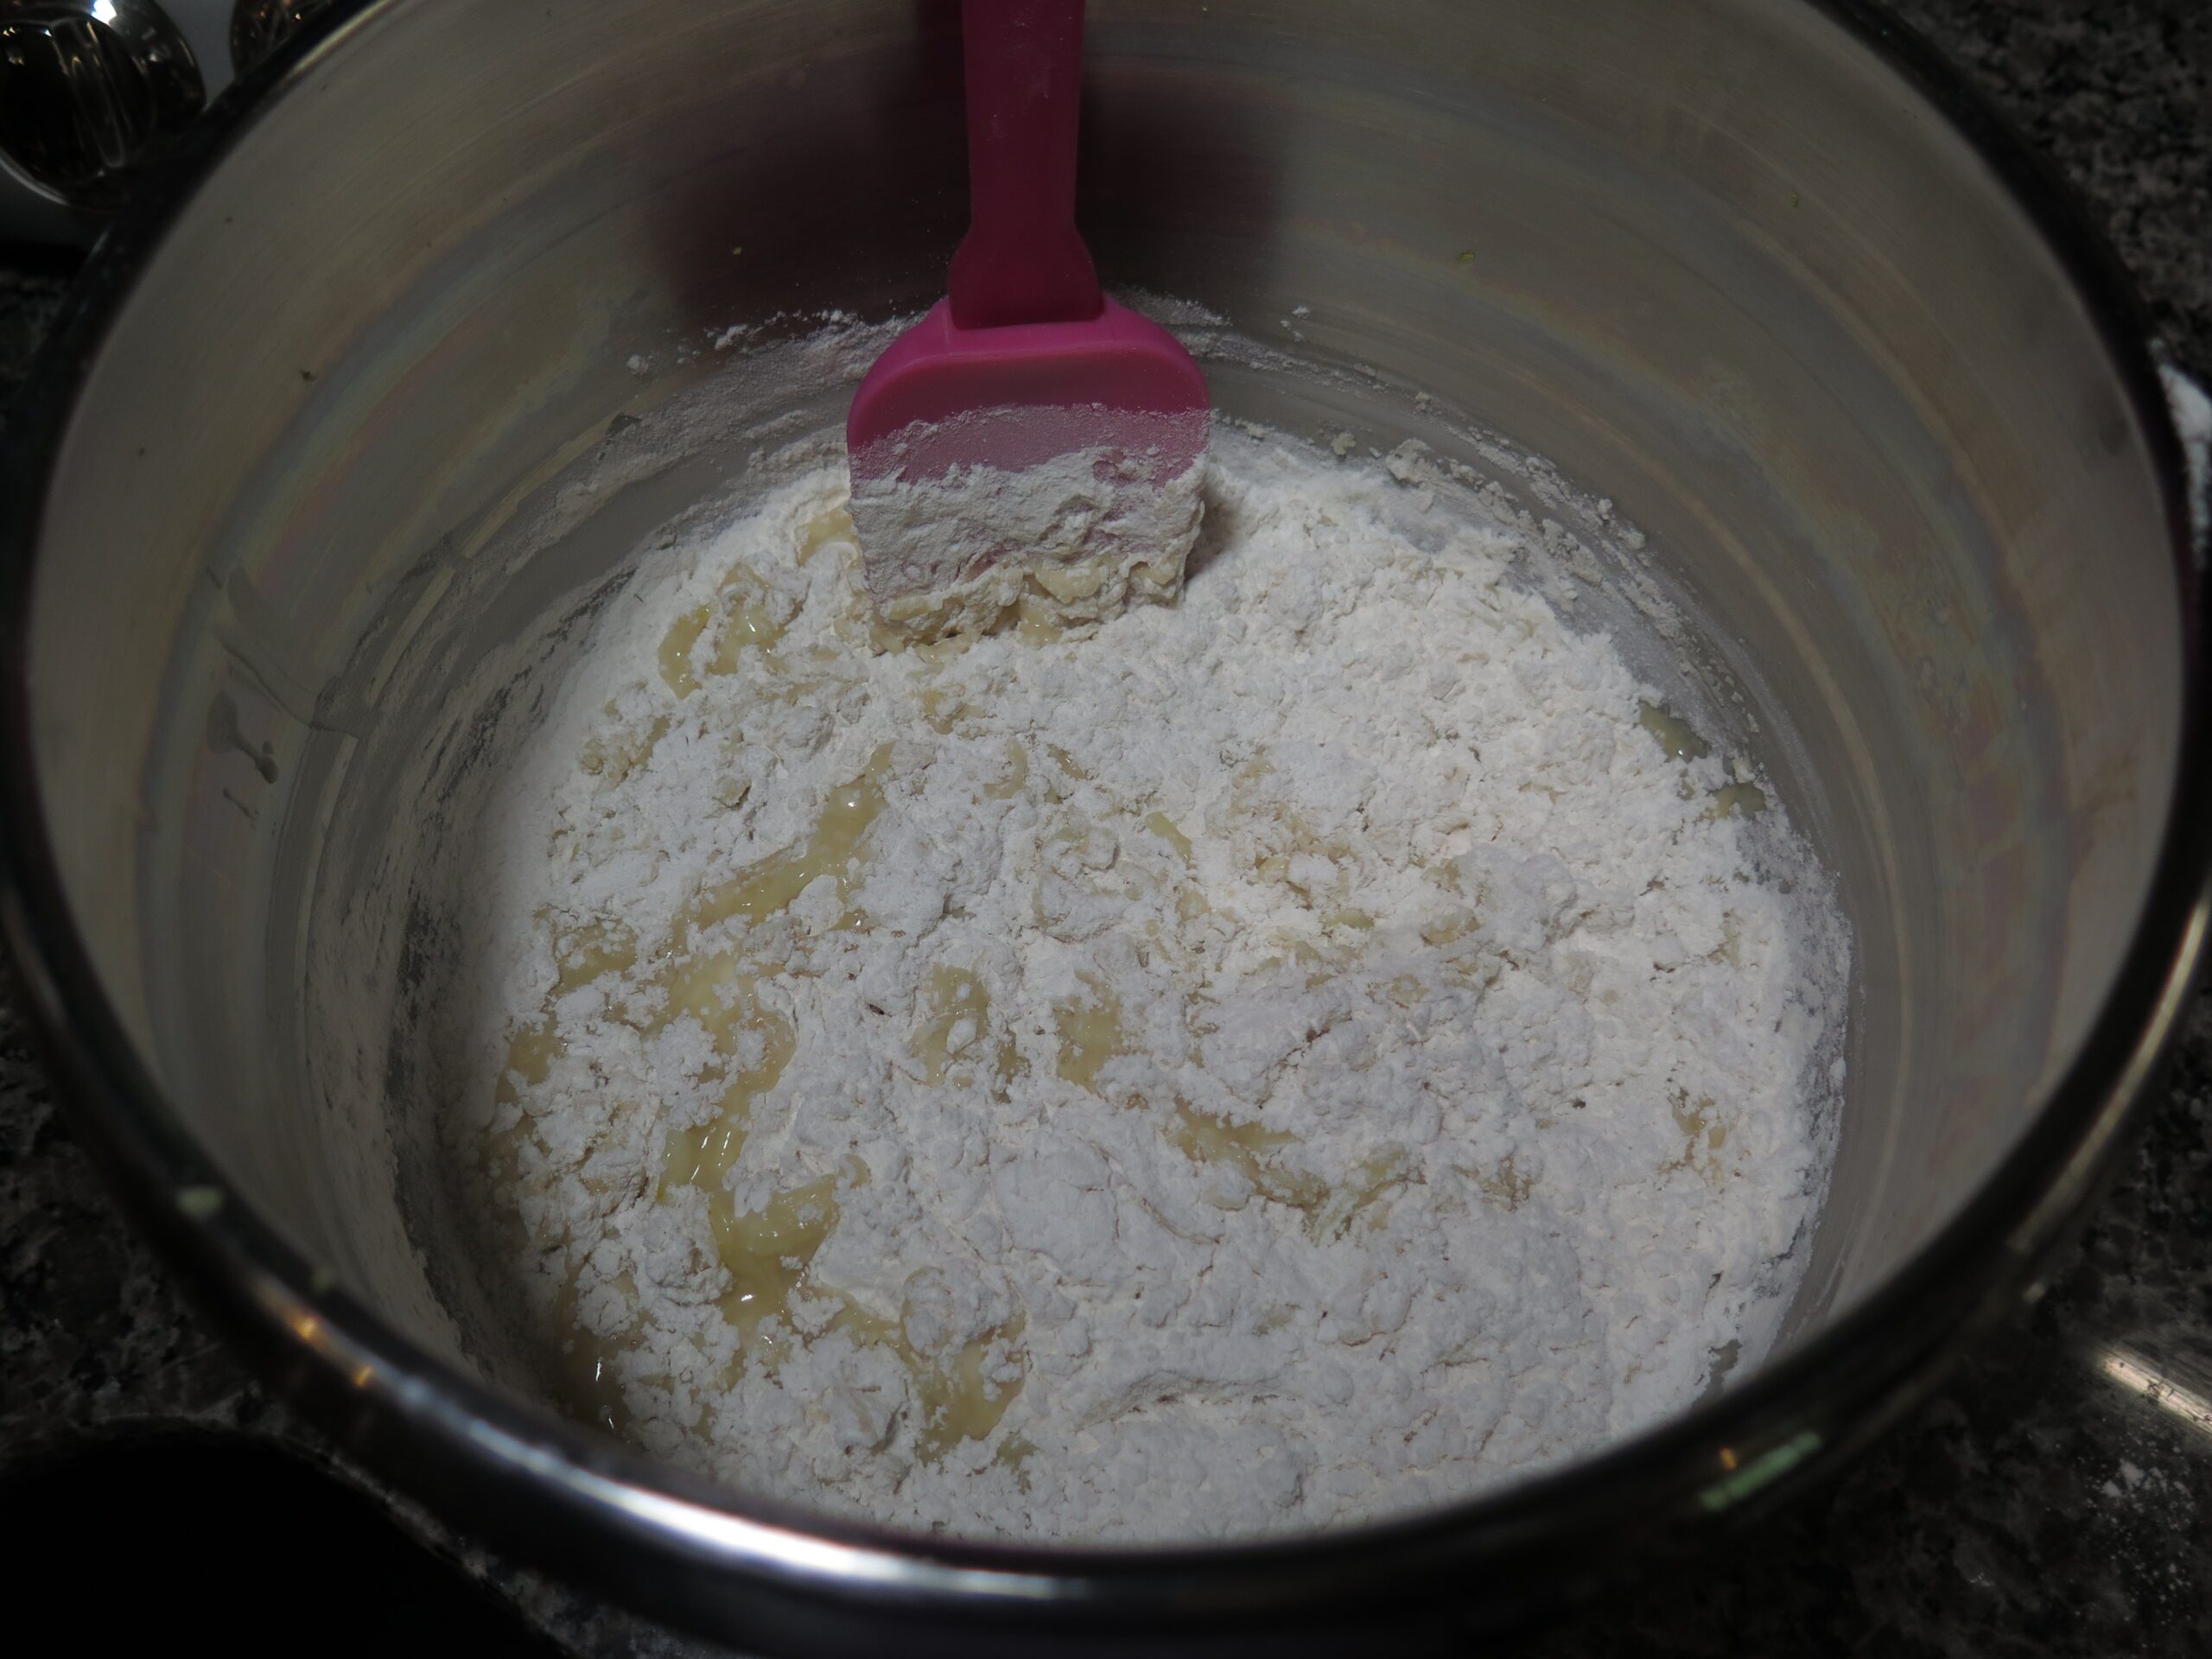 Dry ingredients added to wet ingredients